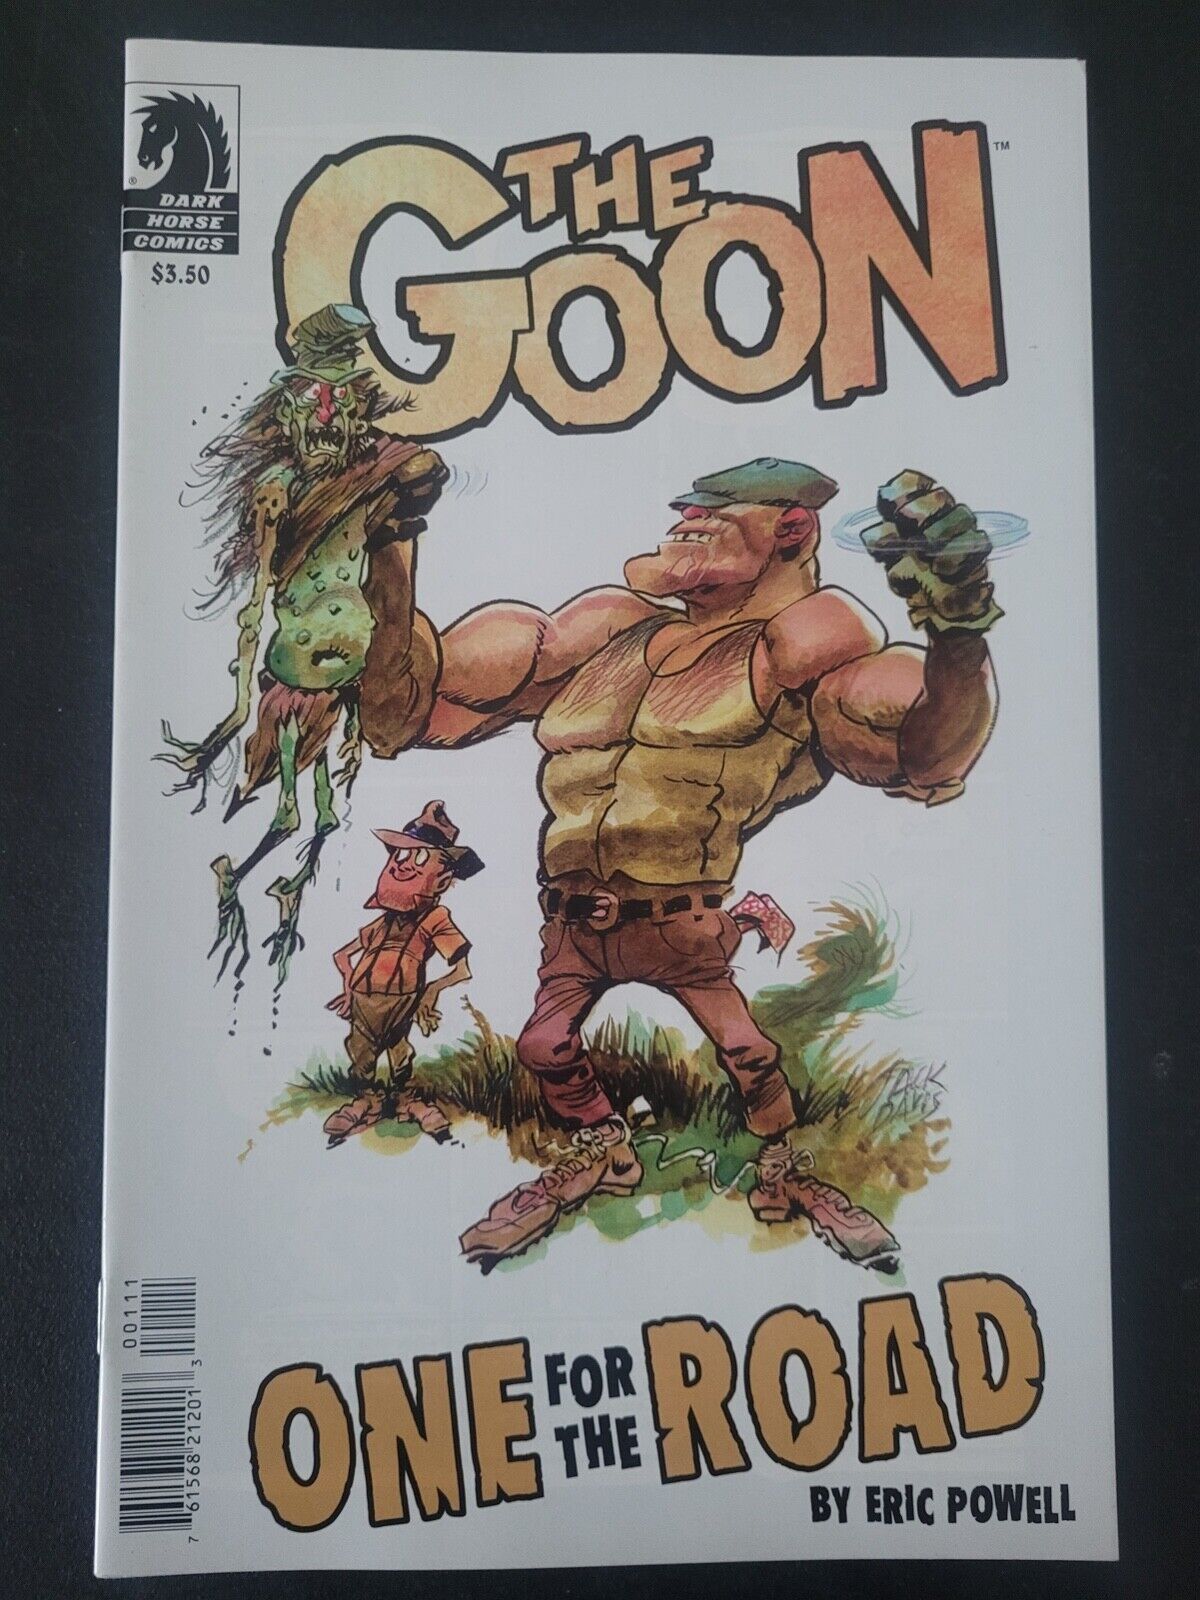 THE GOON: ONE FOR THE ROAD #1 (2014) DARK HORSE COMICS ERIC POWELL STORY & ART